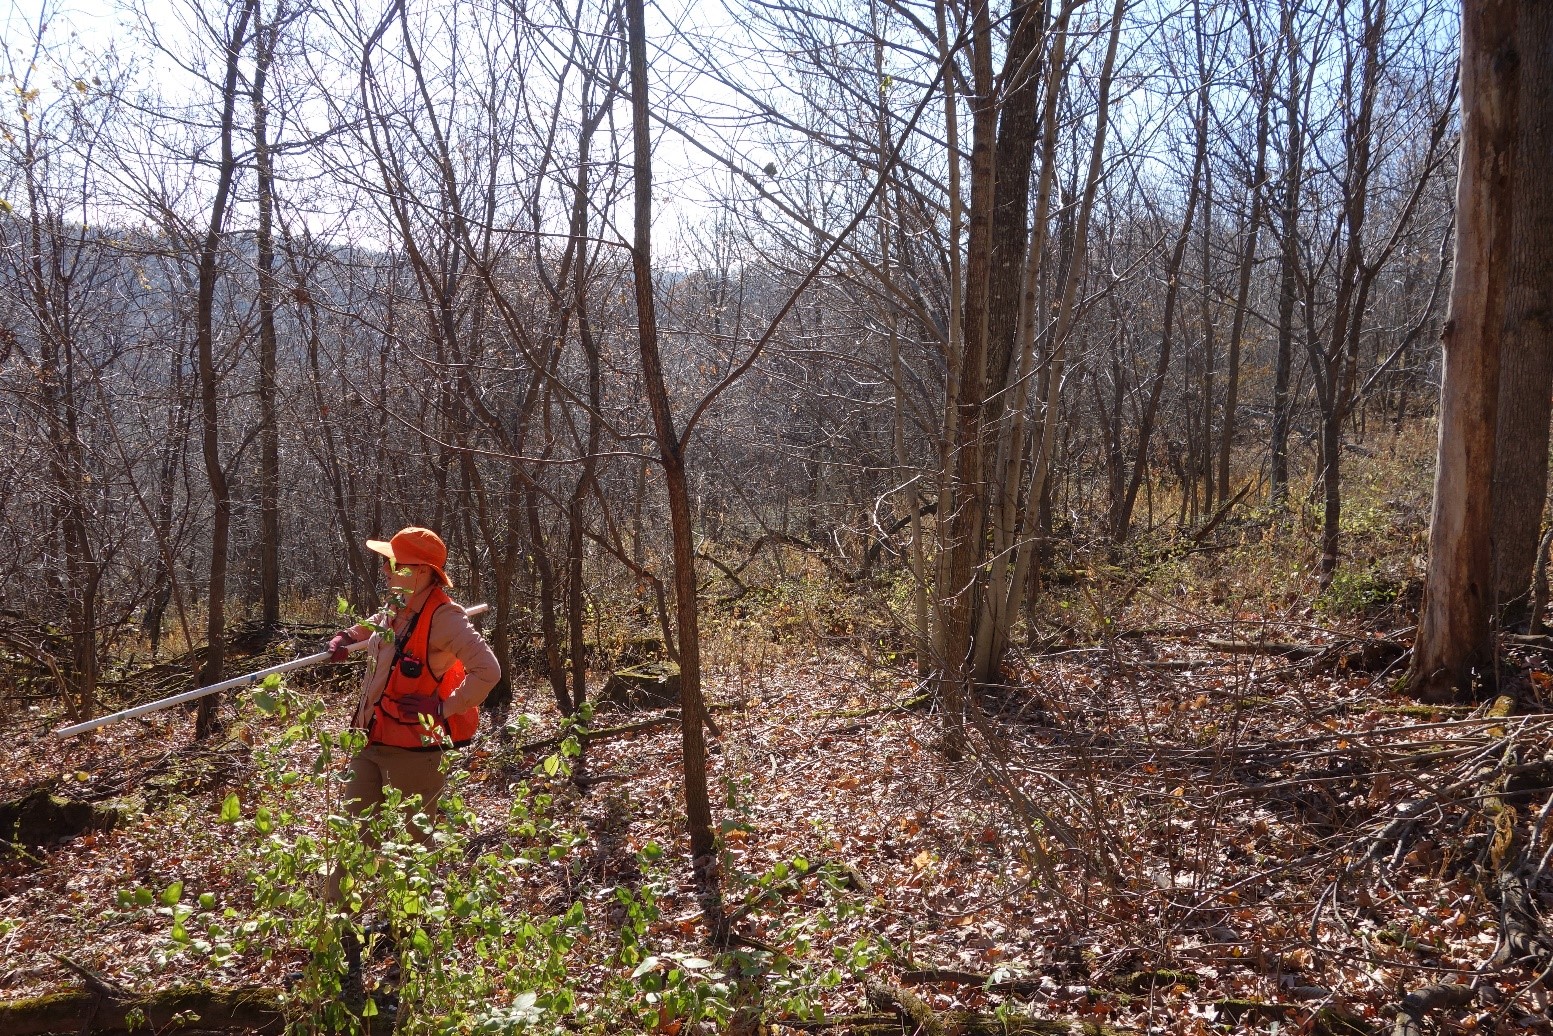 Michelle Martin among mixed hardwood regeneration in fall 2021. Note the black walnut stem behind her.